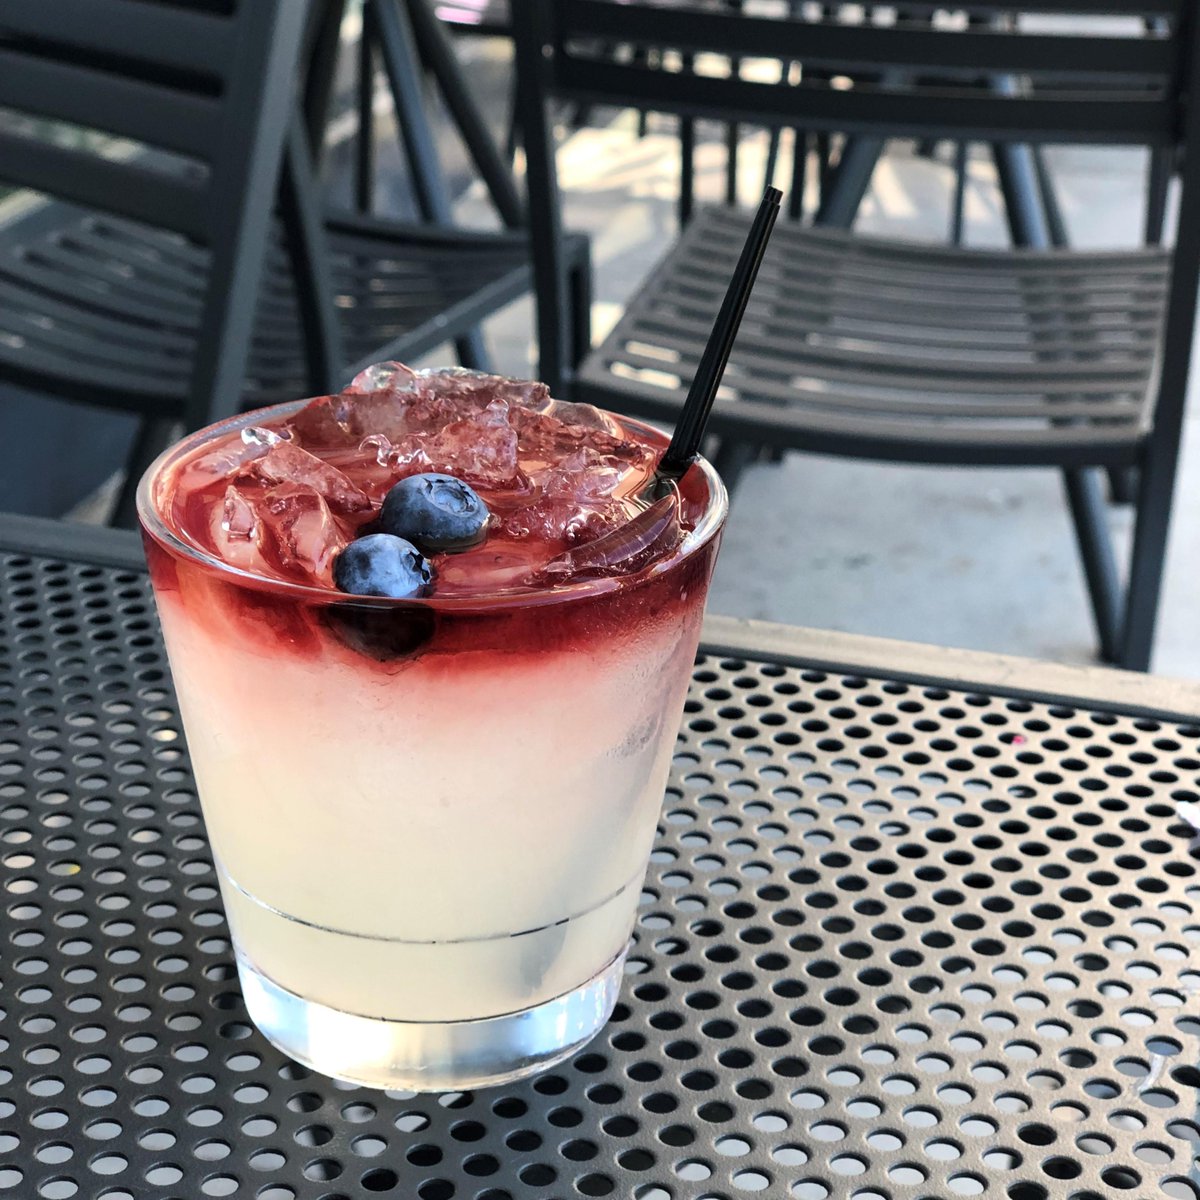 Apparently the weather thinks it's still summer, so we're rolling with it... blueberry lemonades on the patio it is! 🍸 (P.s. Check our Instagram at 10am tomorrow morning for a Brunch Battle ticket giveaway! @gatherboston)